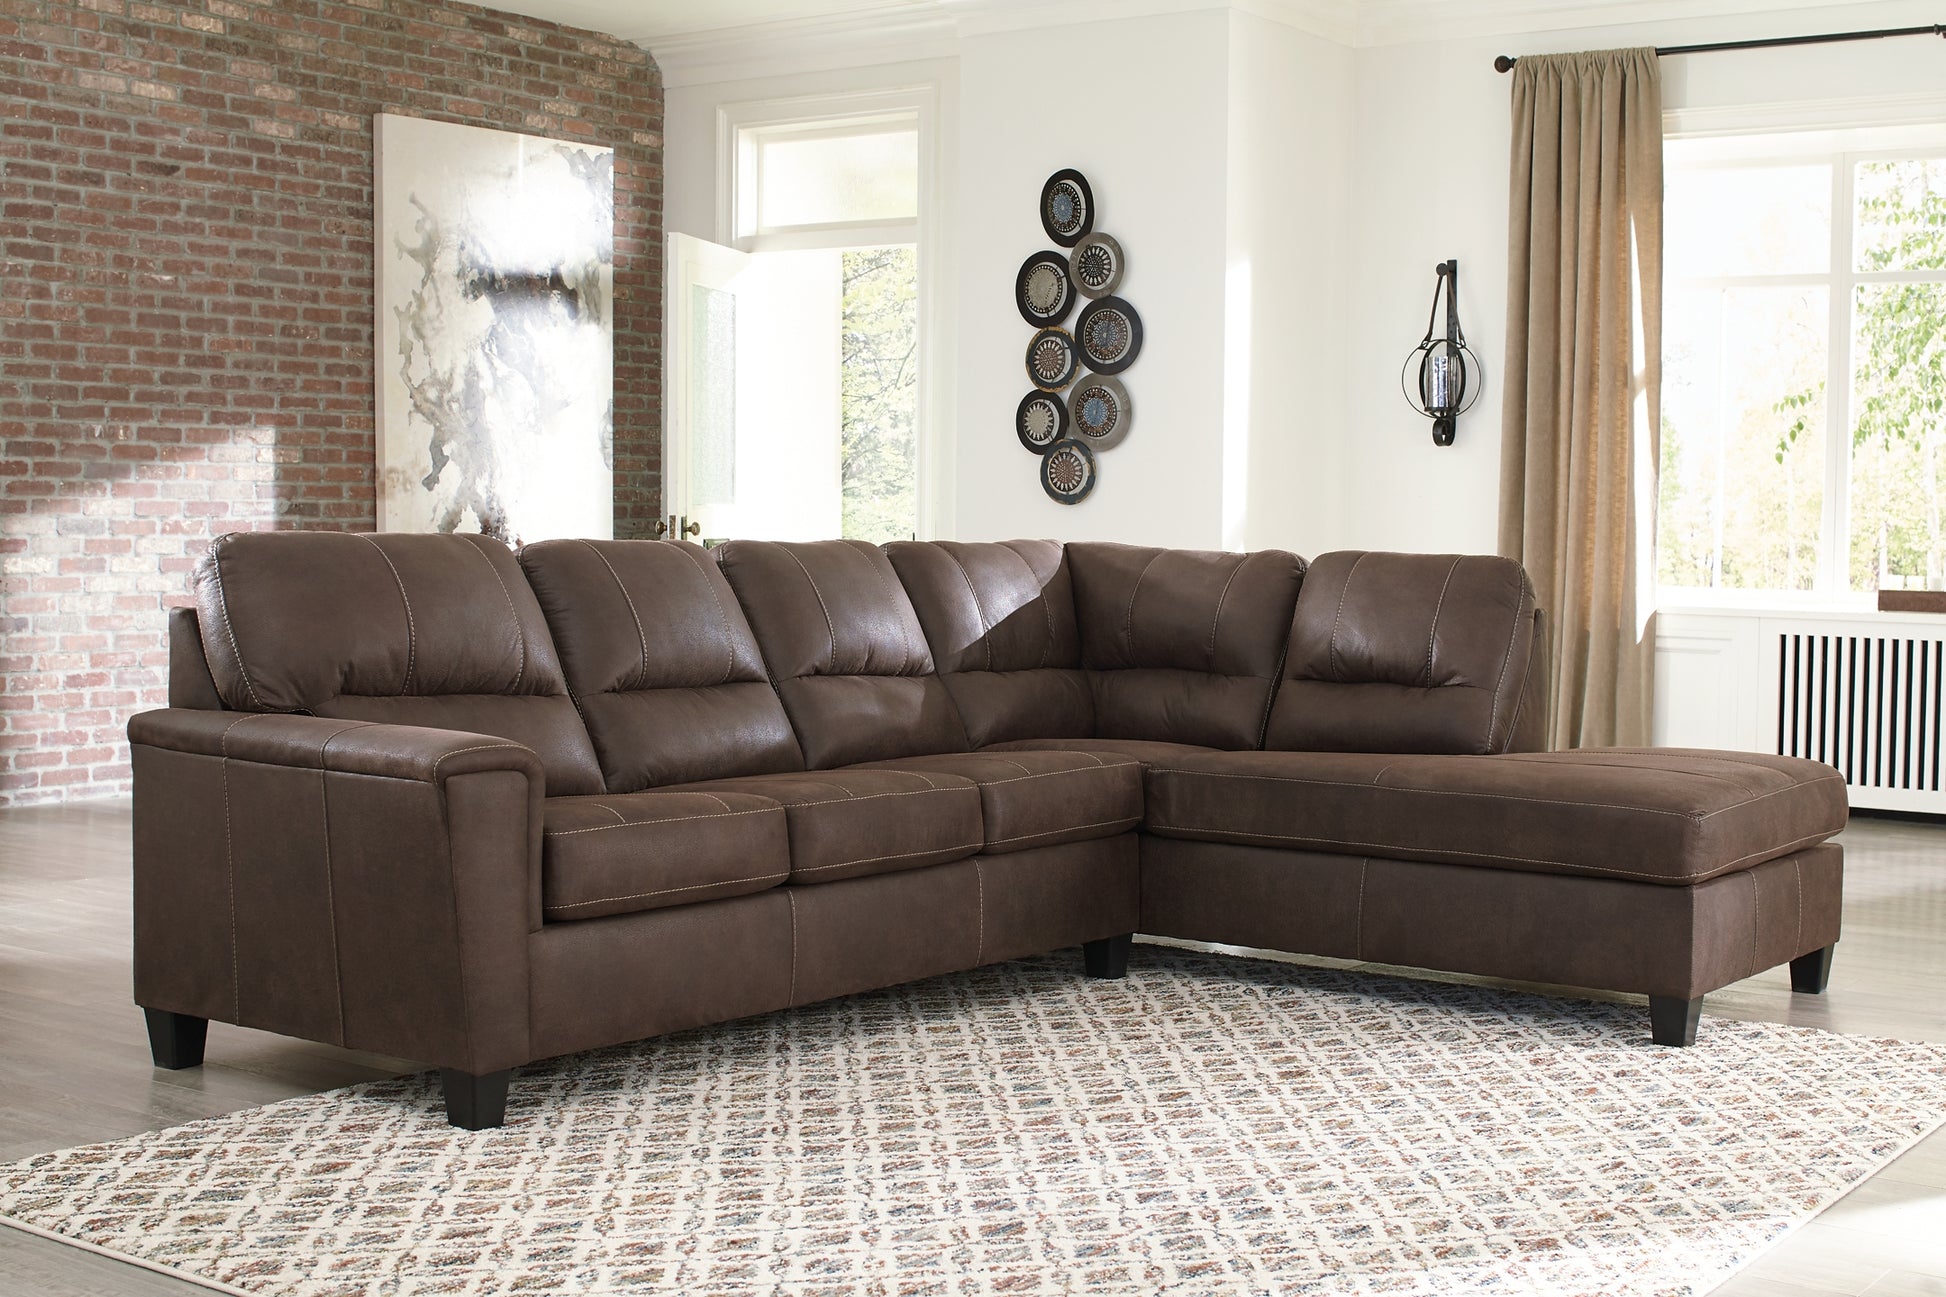 Navi 2-Piece Sectional with Chaise JB's Furniture  Home Furniture, Home Decor, Furniture Store